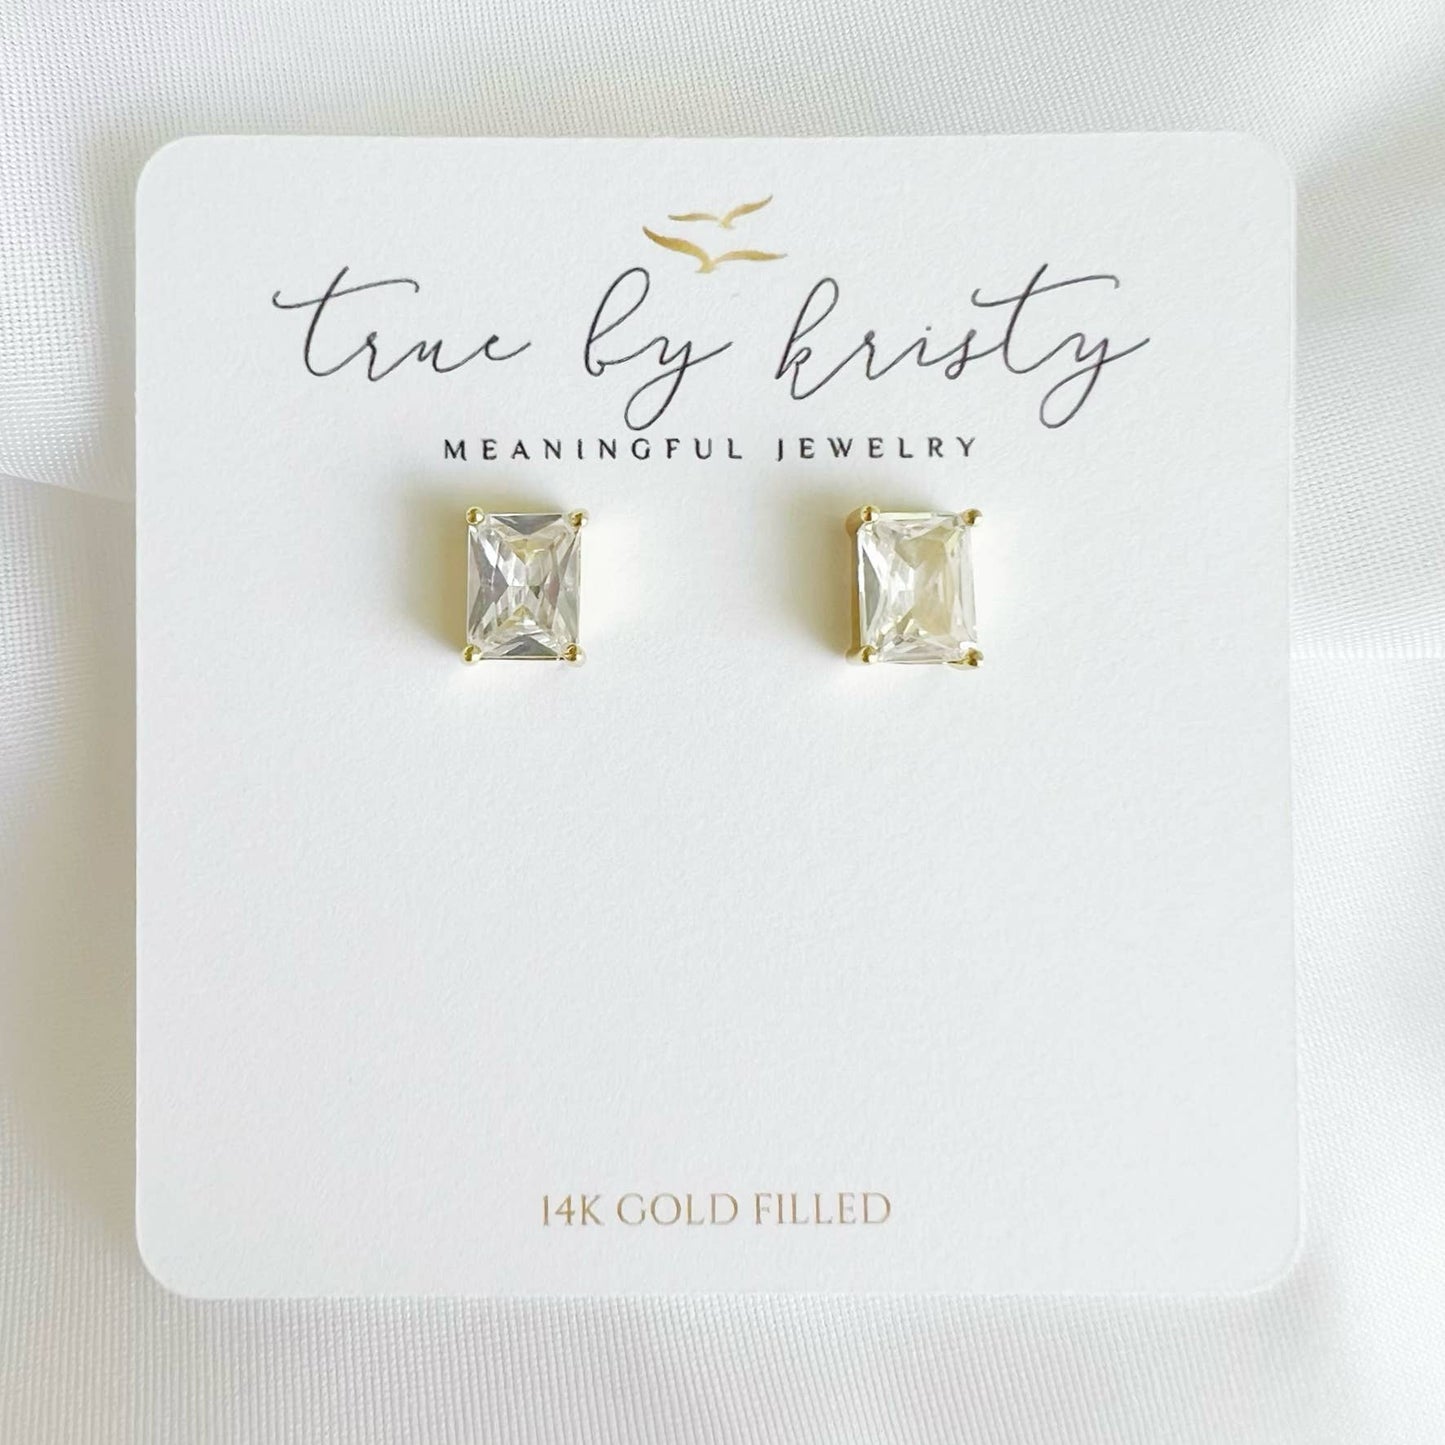 Goldie CZ Diamond Studs Earrings Gold Filled